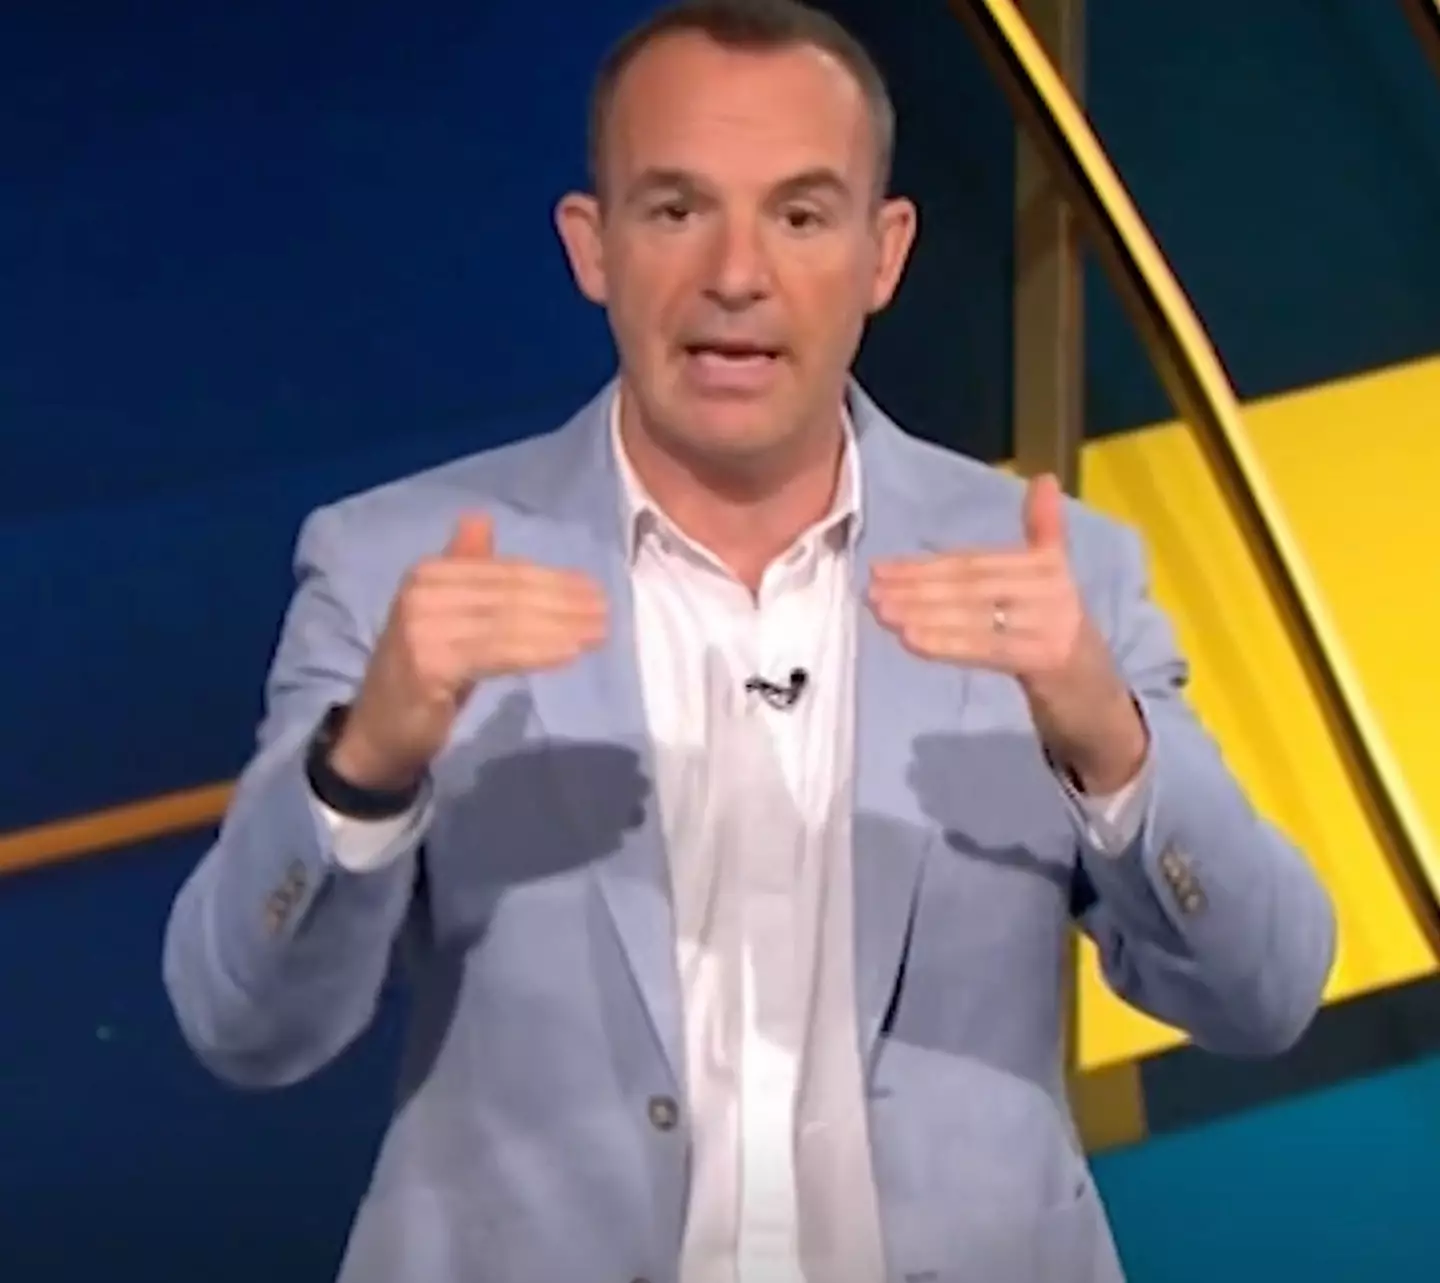 Martin Lewis explained what to do if you think your energy bills are too high.